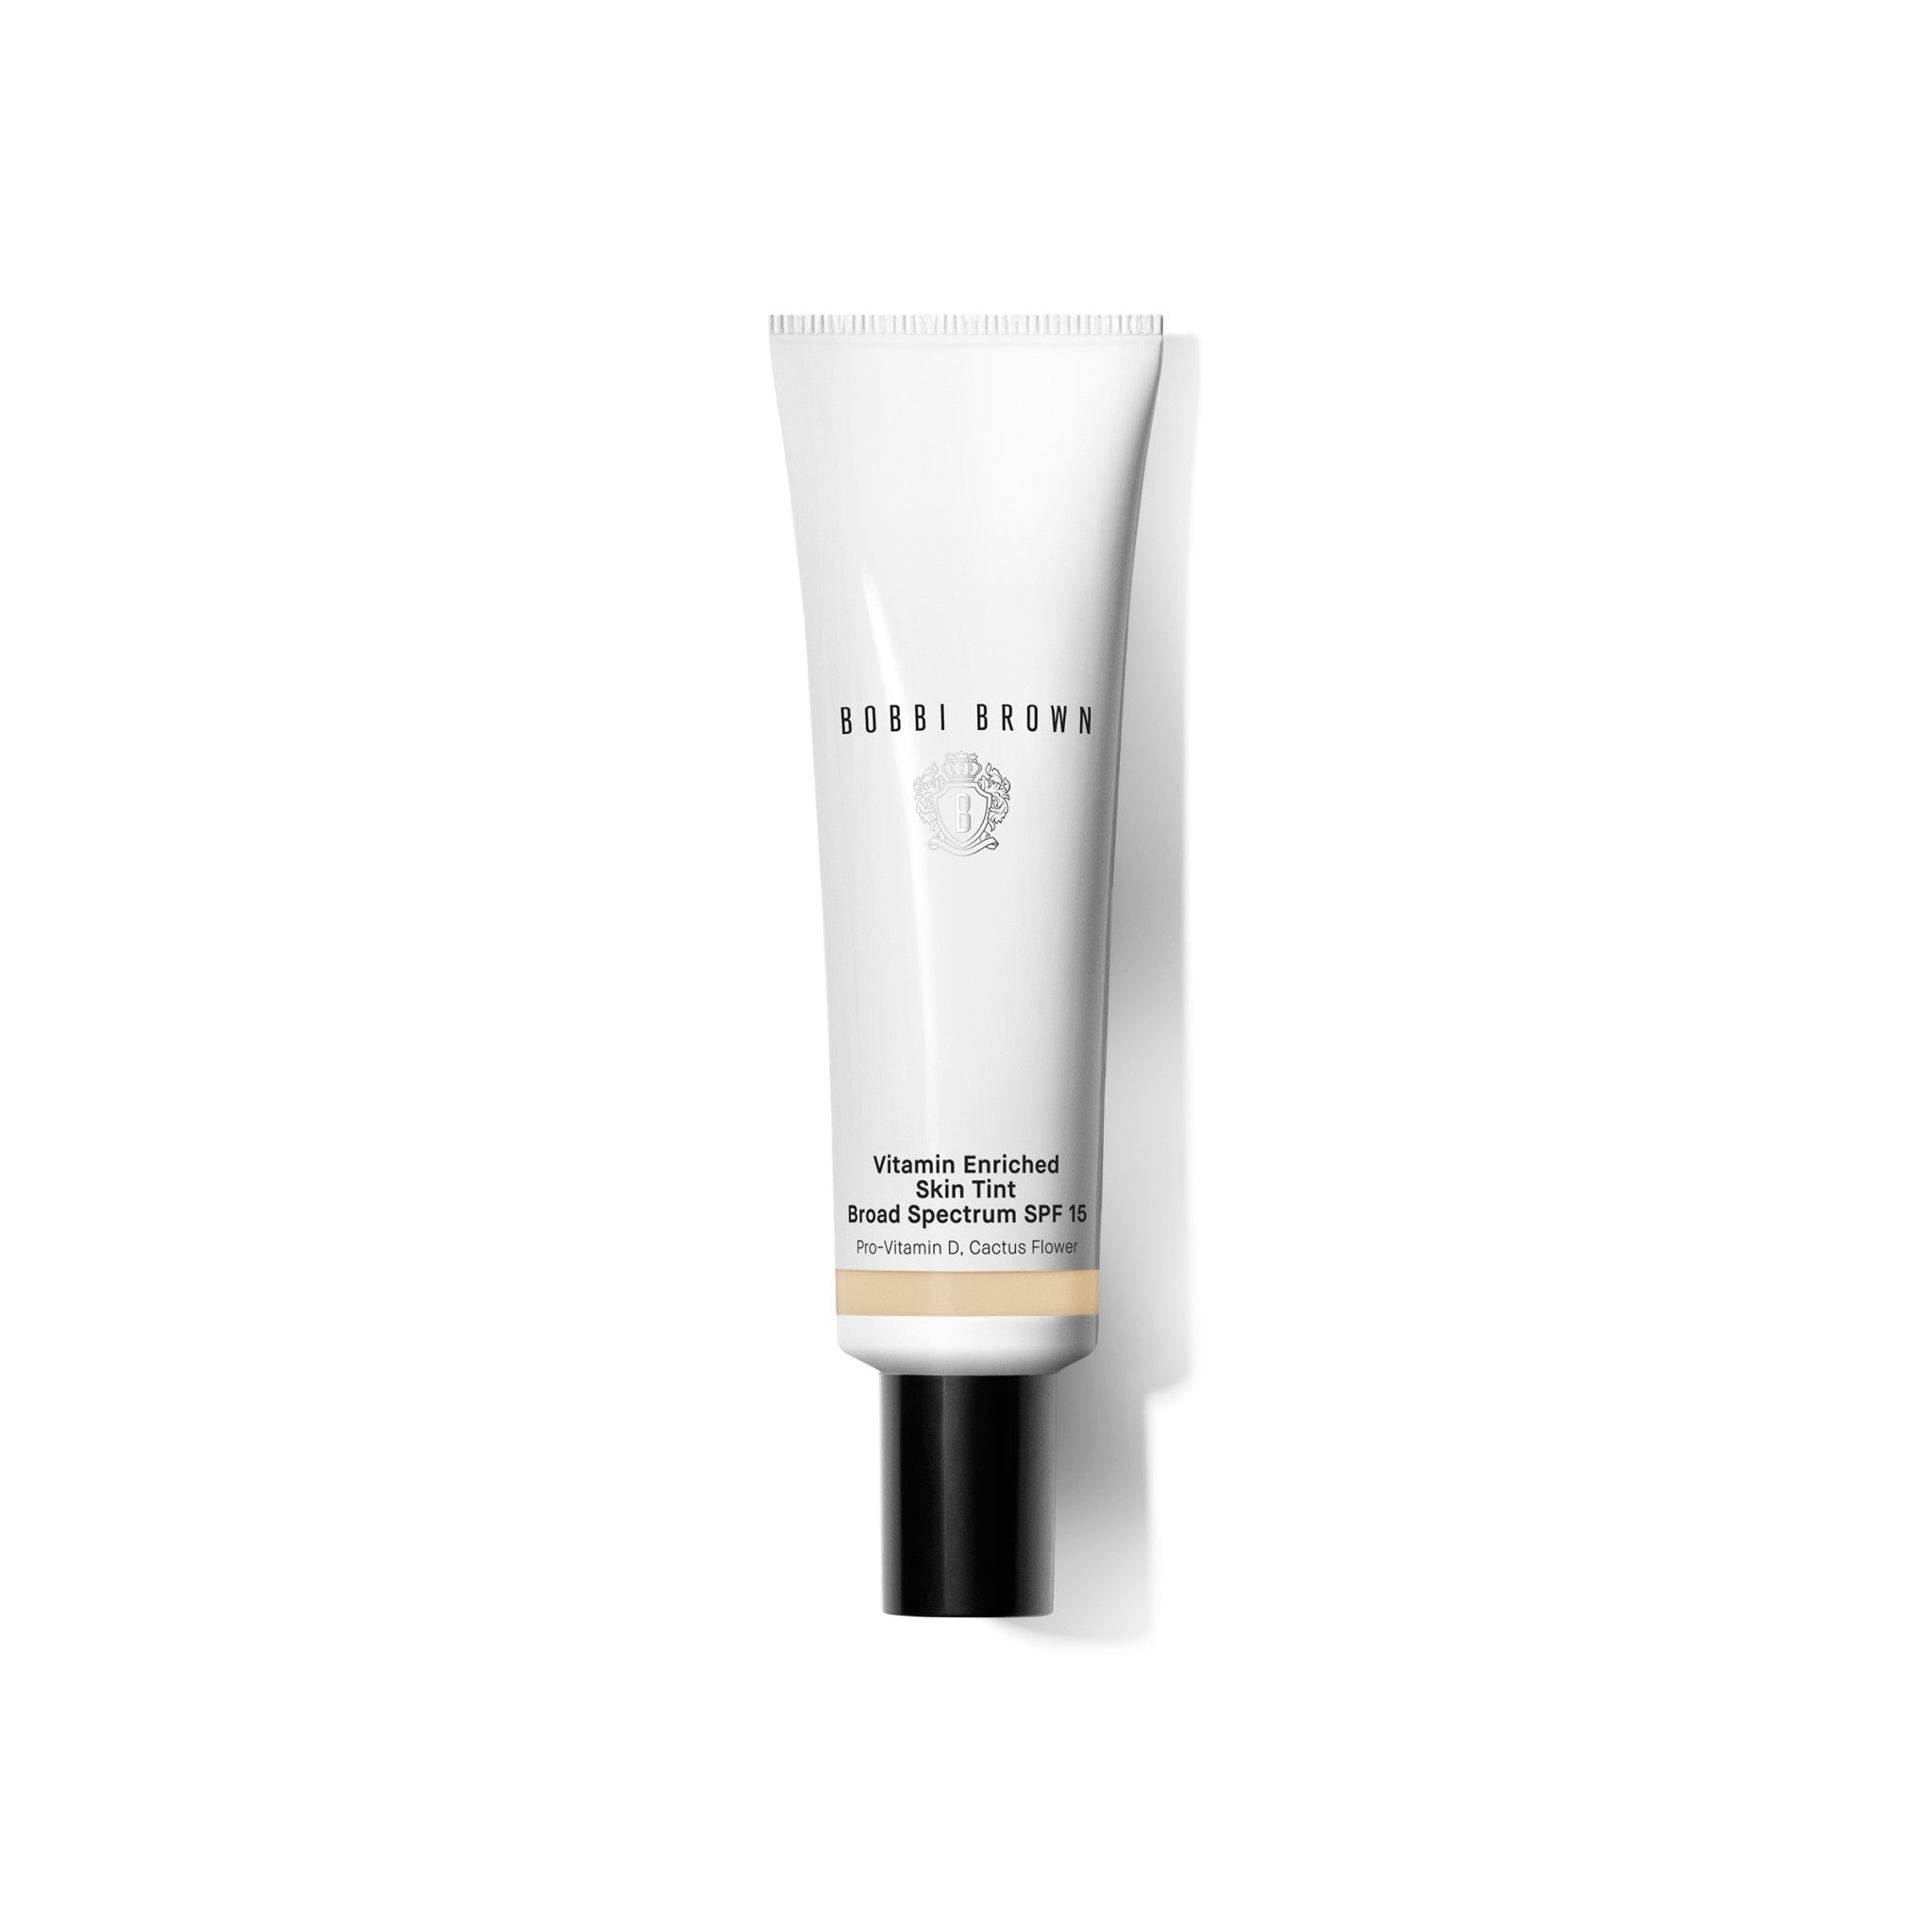 Bobbi Brown Vitamin Enriched Hydrating Skin Tint SPF 15 with Hyaluronic Acid Color/Shade variant: Fair 1 main image.